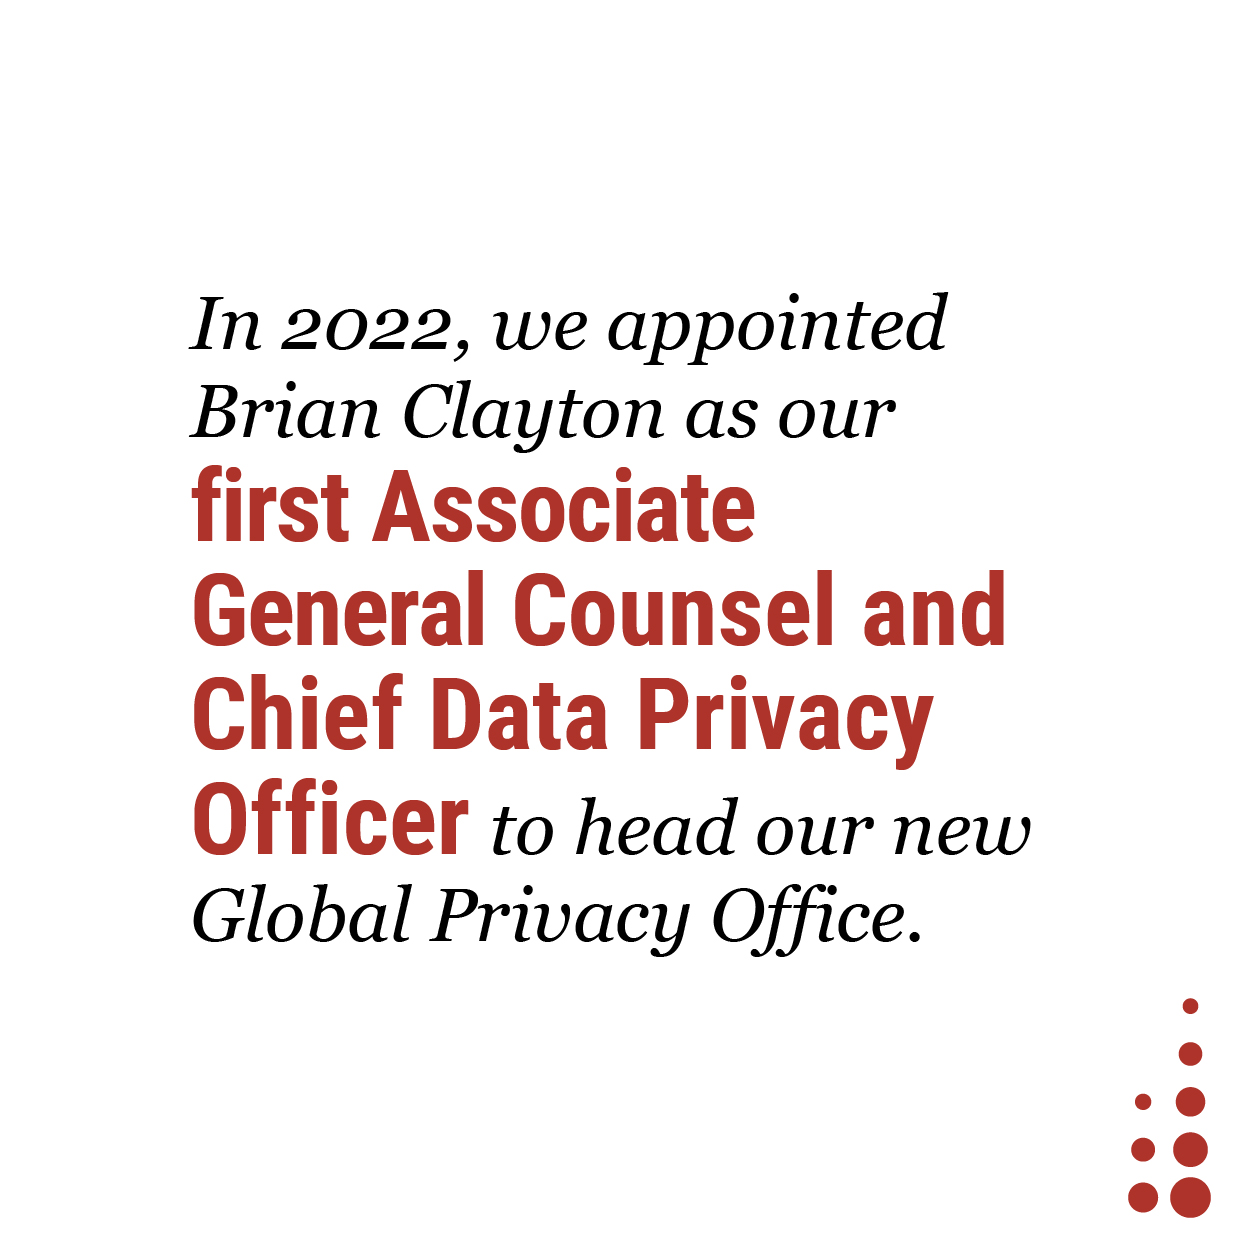 In 2022, we appointed Brian Clayton as our first Associate General Counsel and Chief Data Privacy Officer to head our new Global Privacy Office.